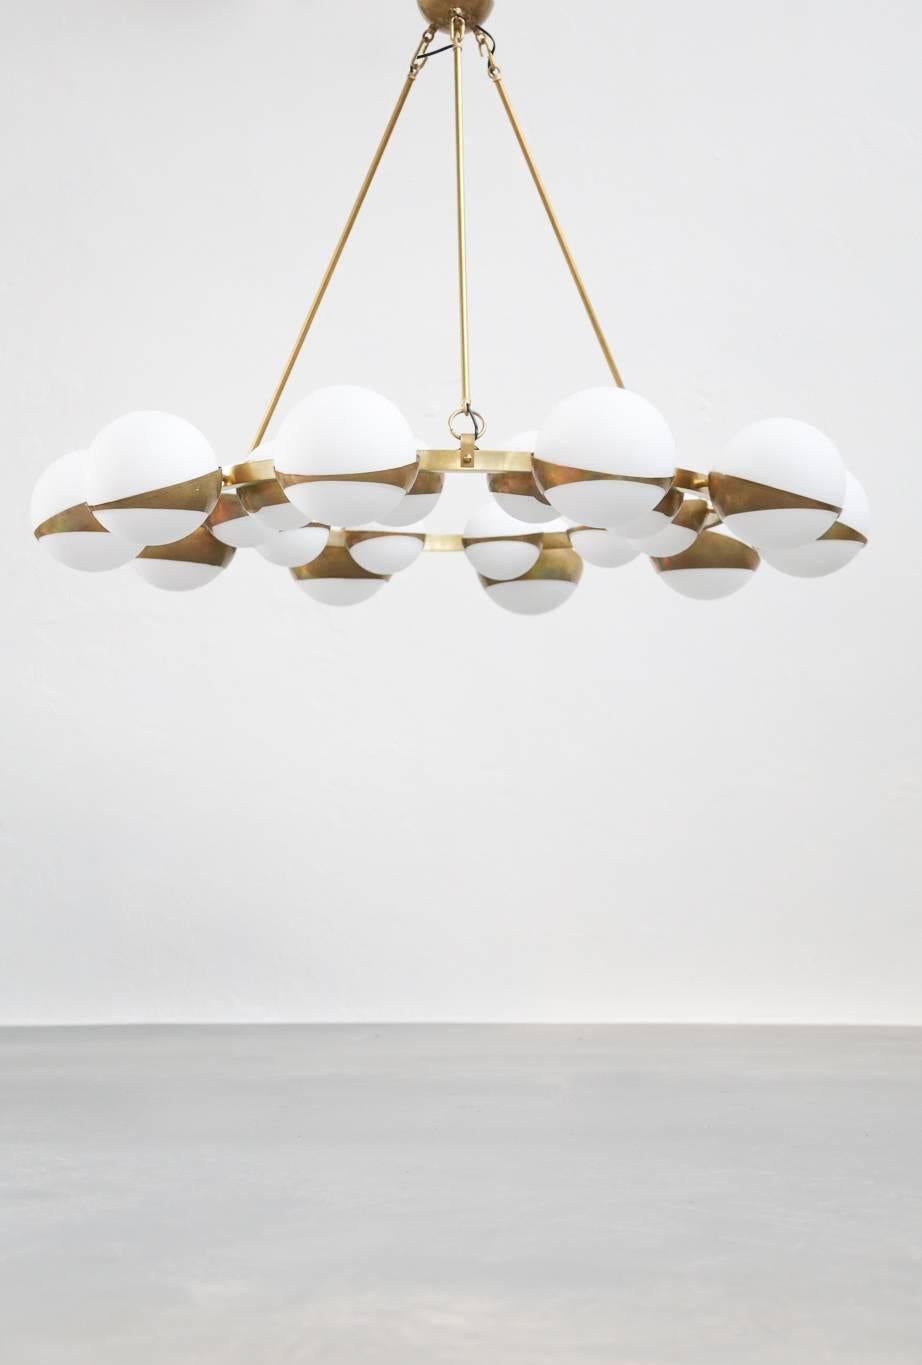 Contemporary Style of Stilnovo Italian Chandelier Opalines Brass Large Sculptural Modernist For Sale